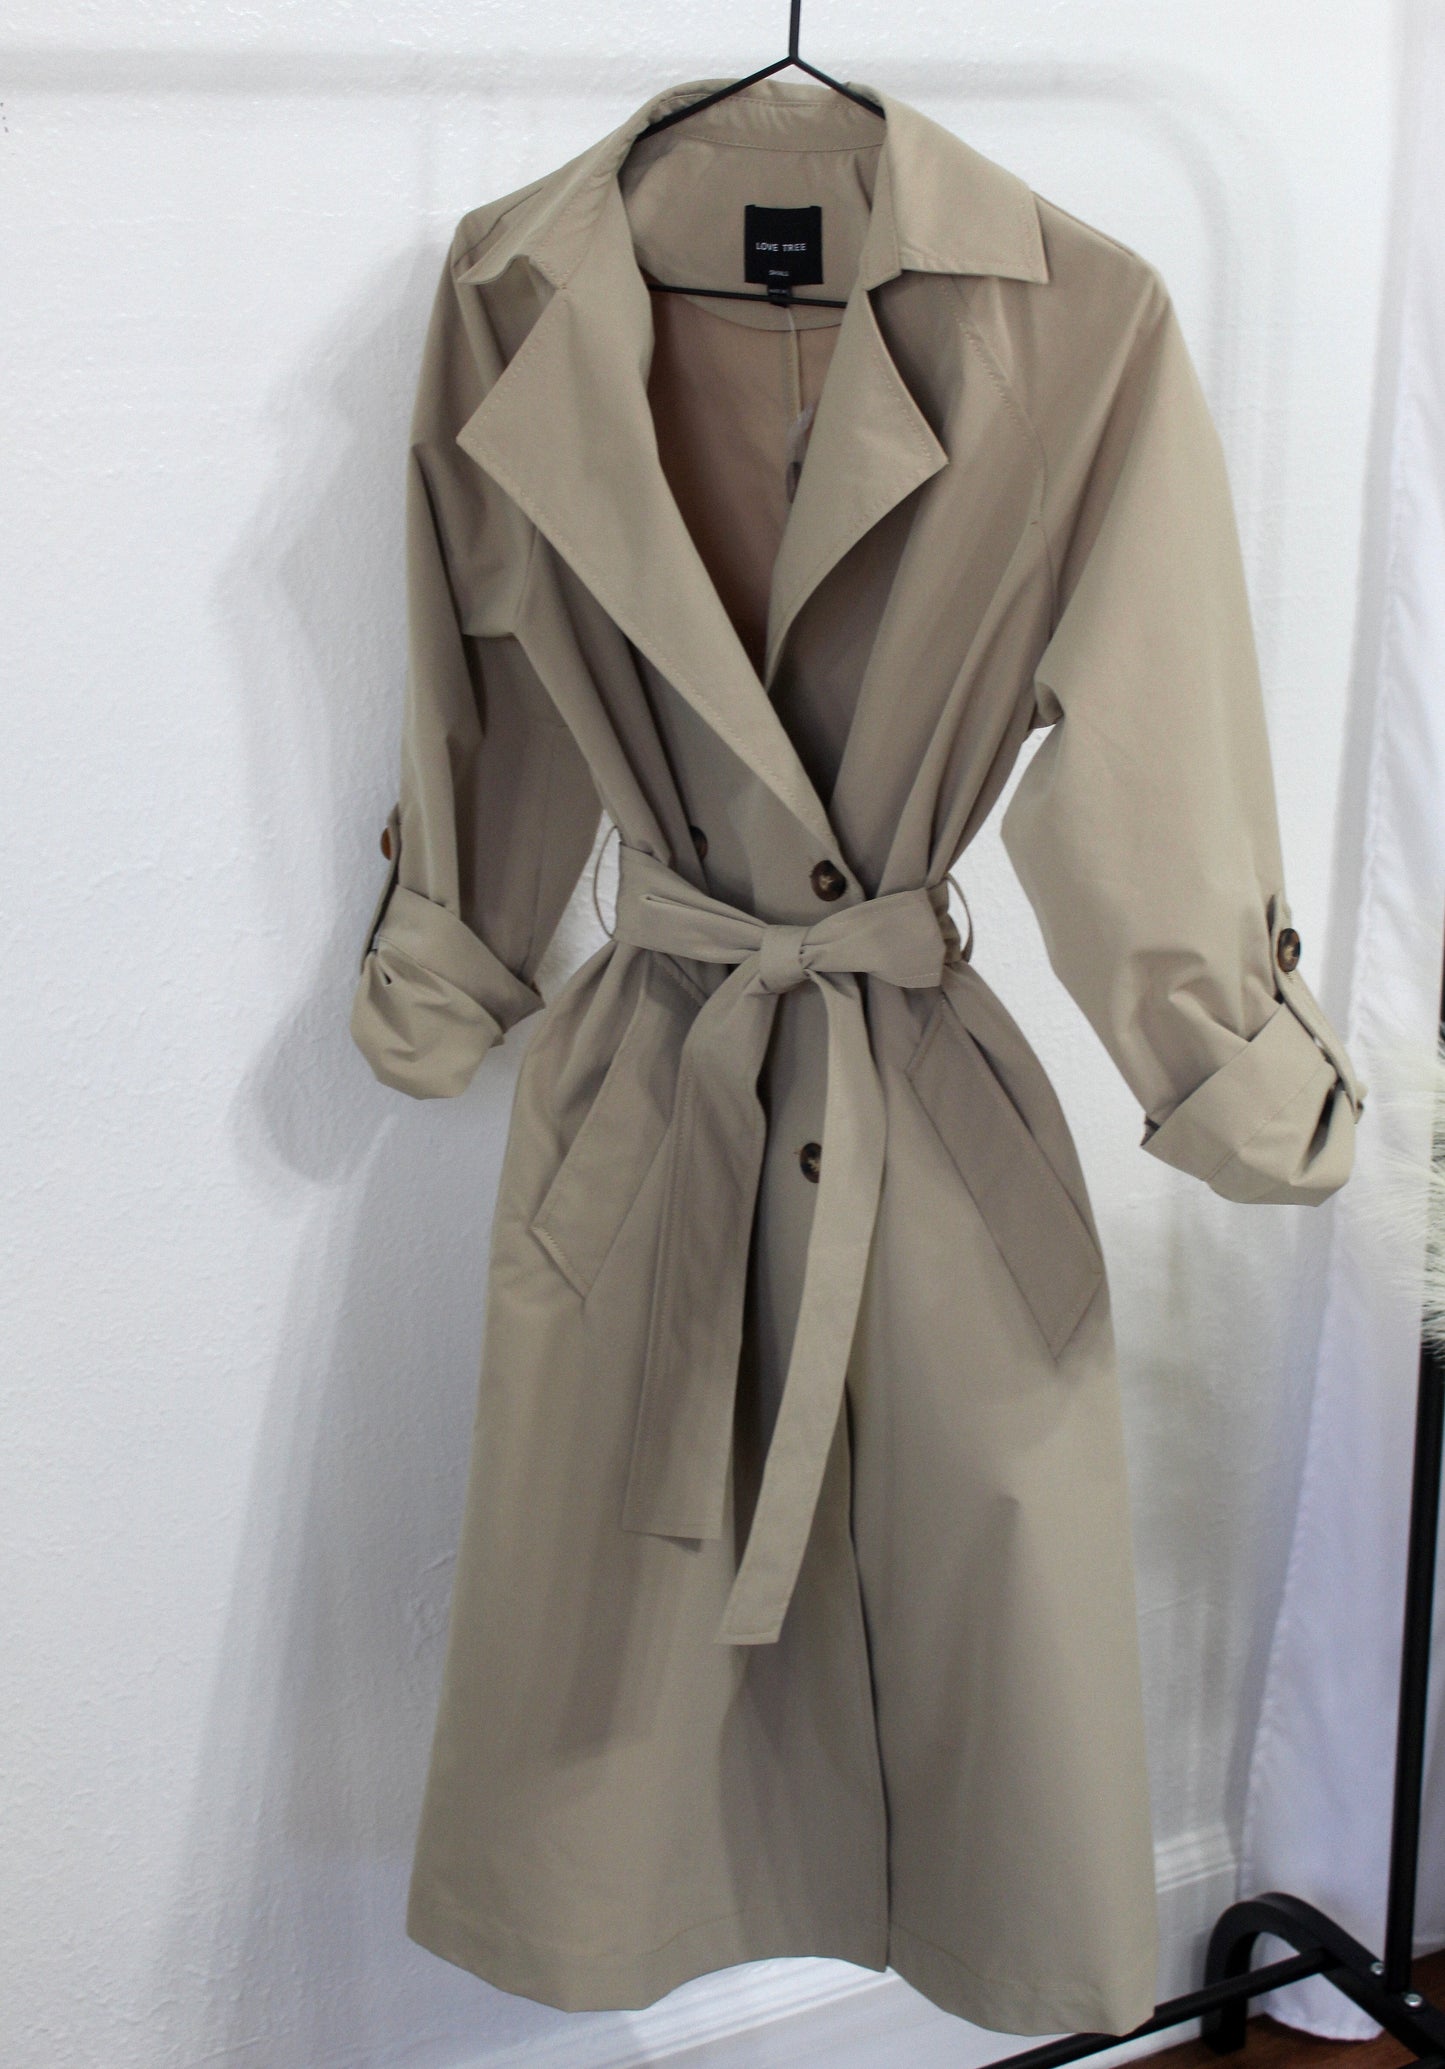 The Lightweight Trench